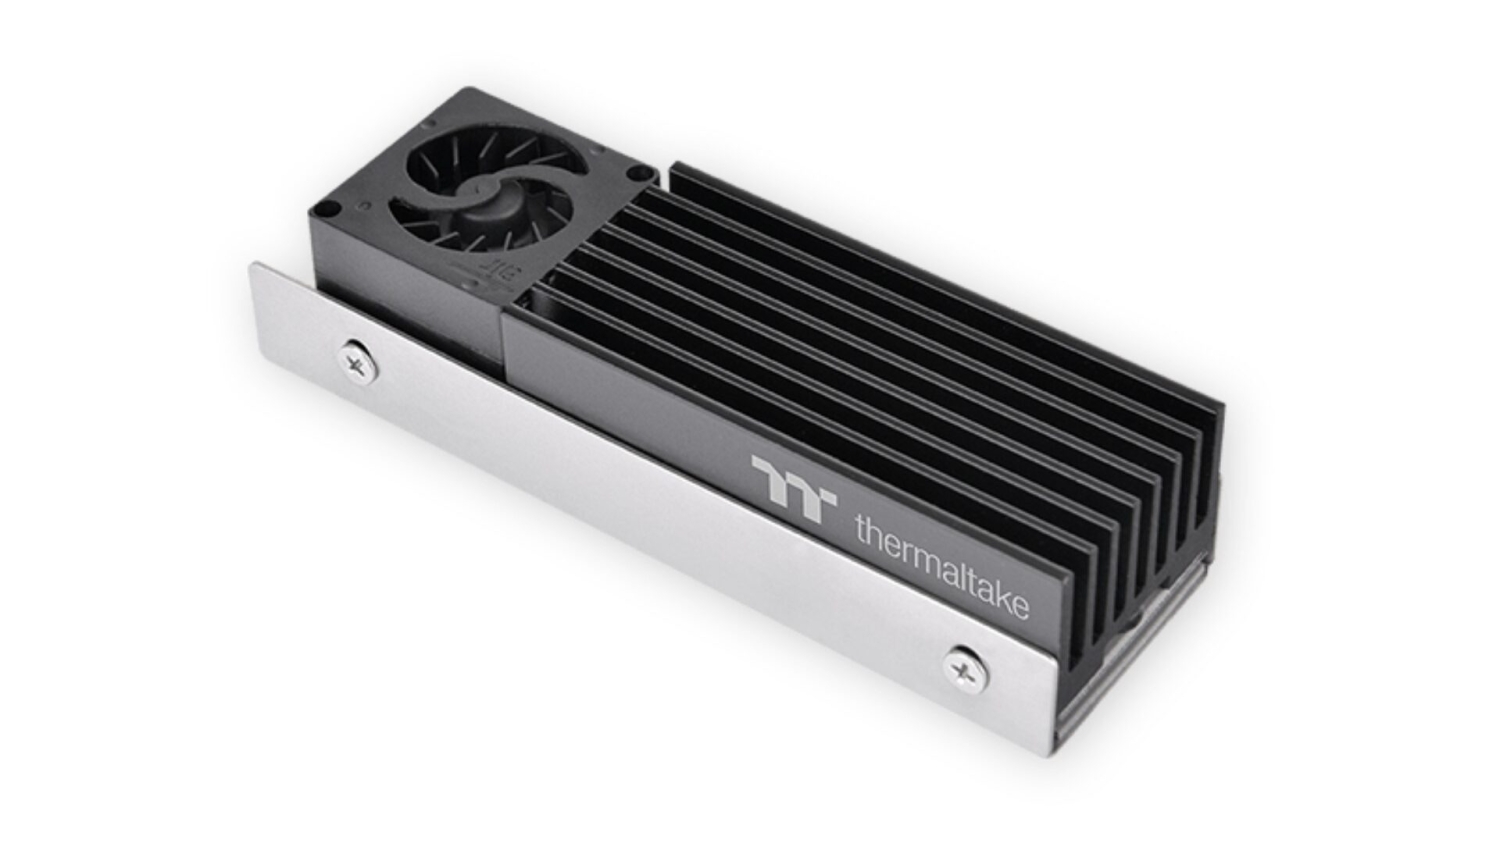 96873_1703_thermaltakes-new-ms-1-2-ssd-cooler-features-8000rpm-fan-heat-pipe-and-heatsink_full.jpg